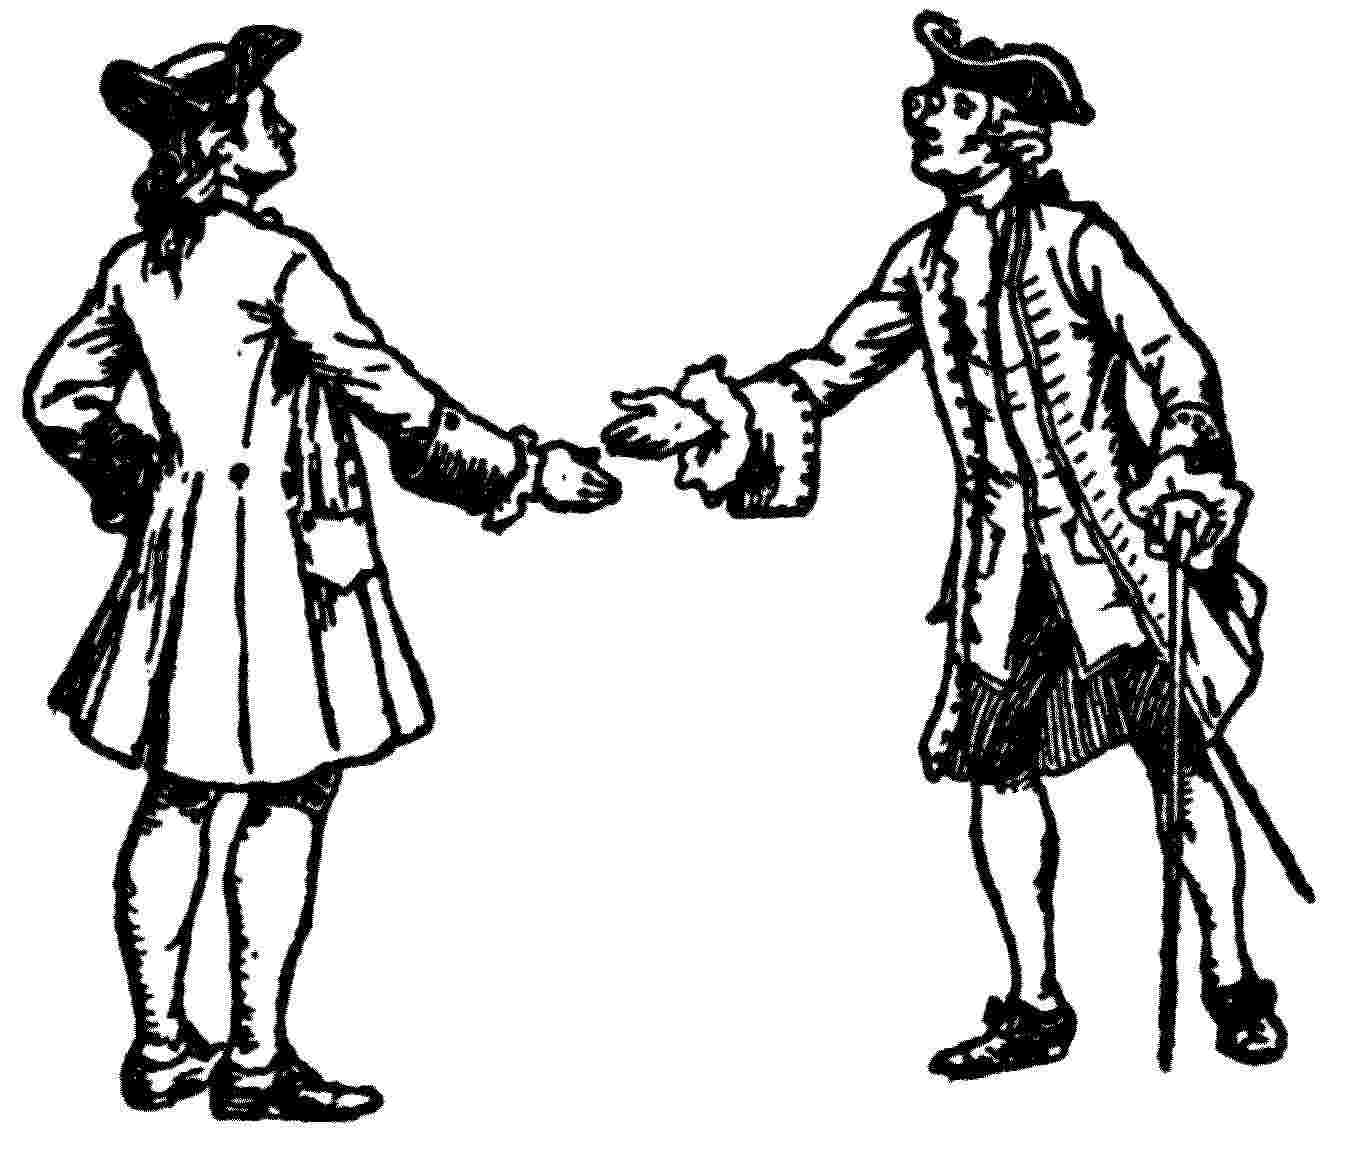 black and white sketches of two men in colonial attire reaching out to shake hands